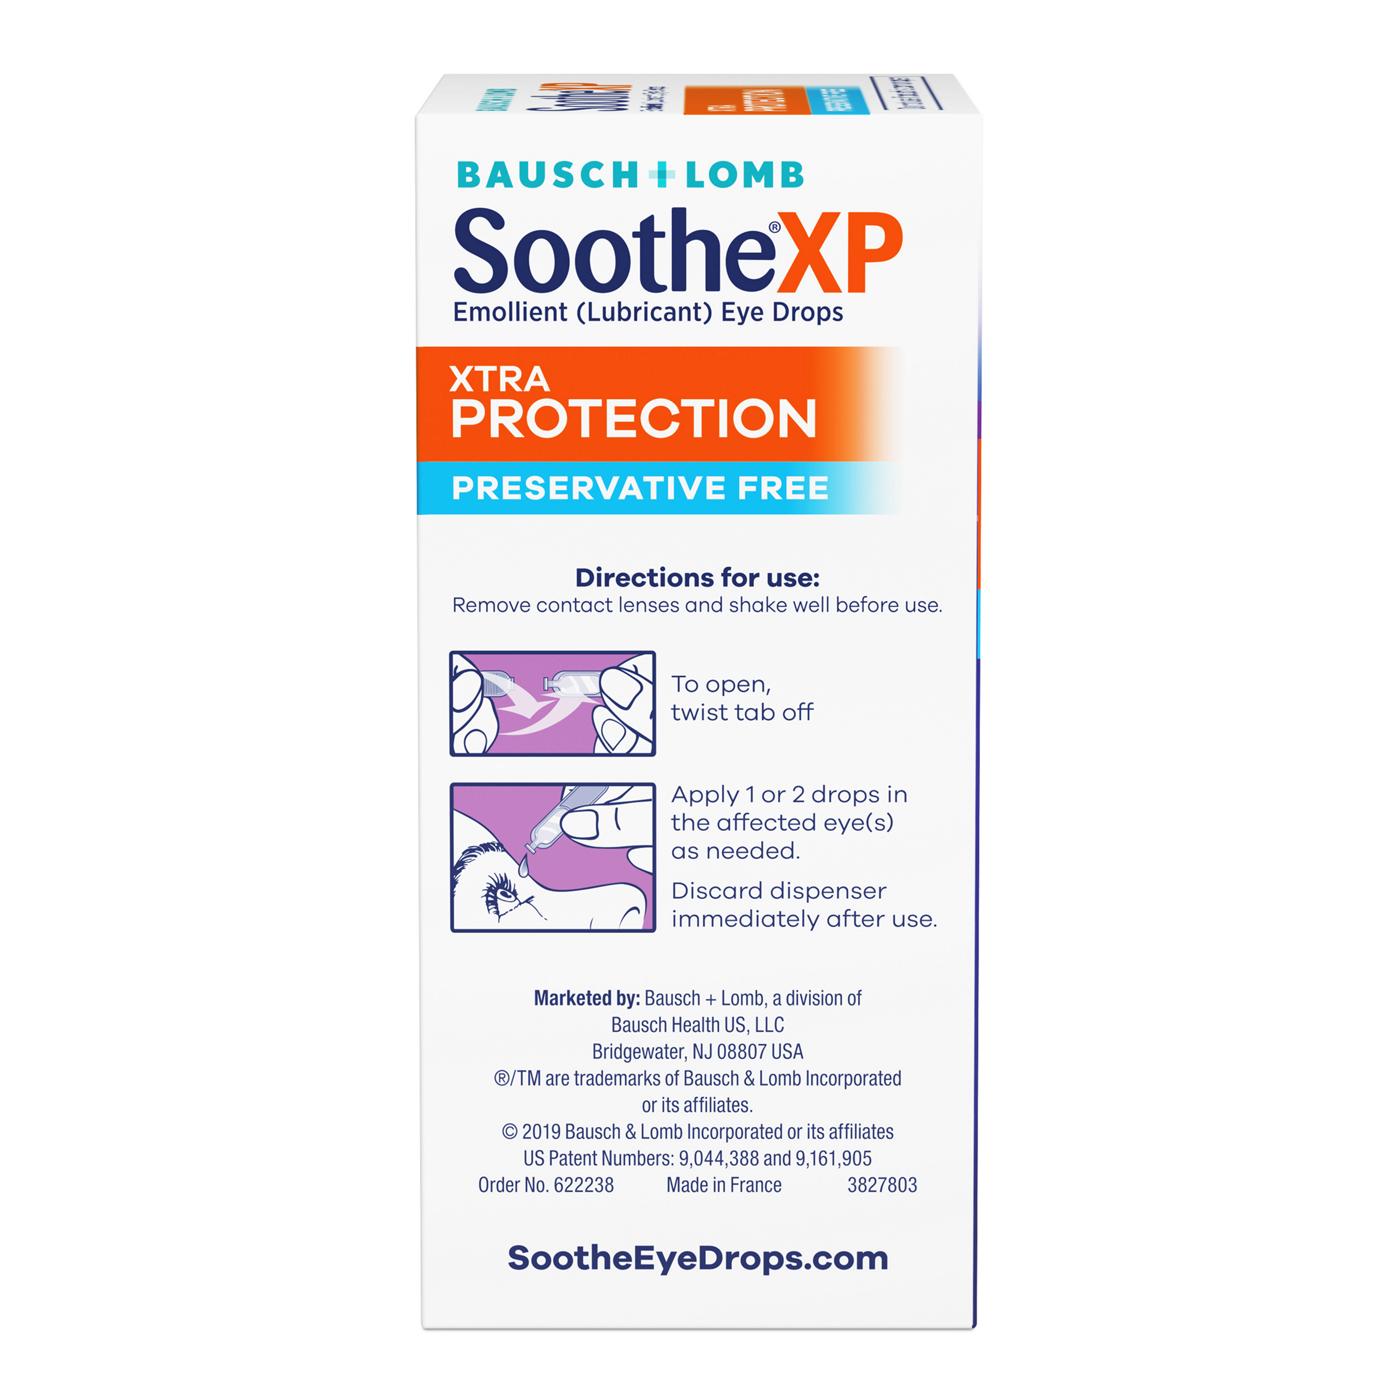 Bausch & Lomb Soothe XP Preservative Free Emollient Lubricant Eye Drops; image 2 of 3